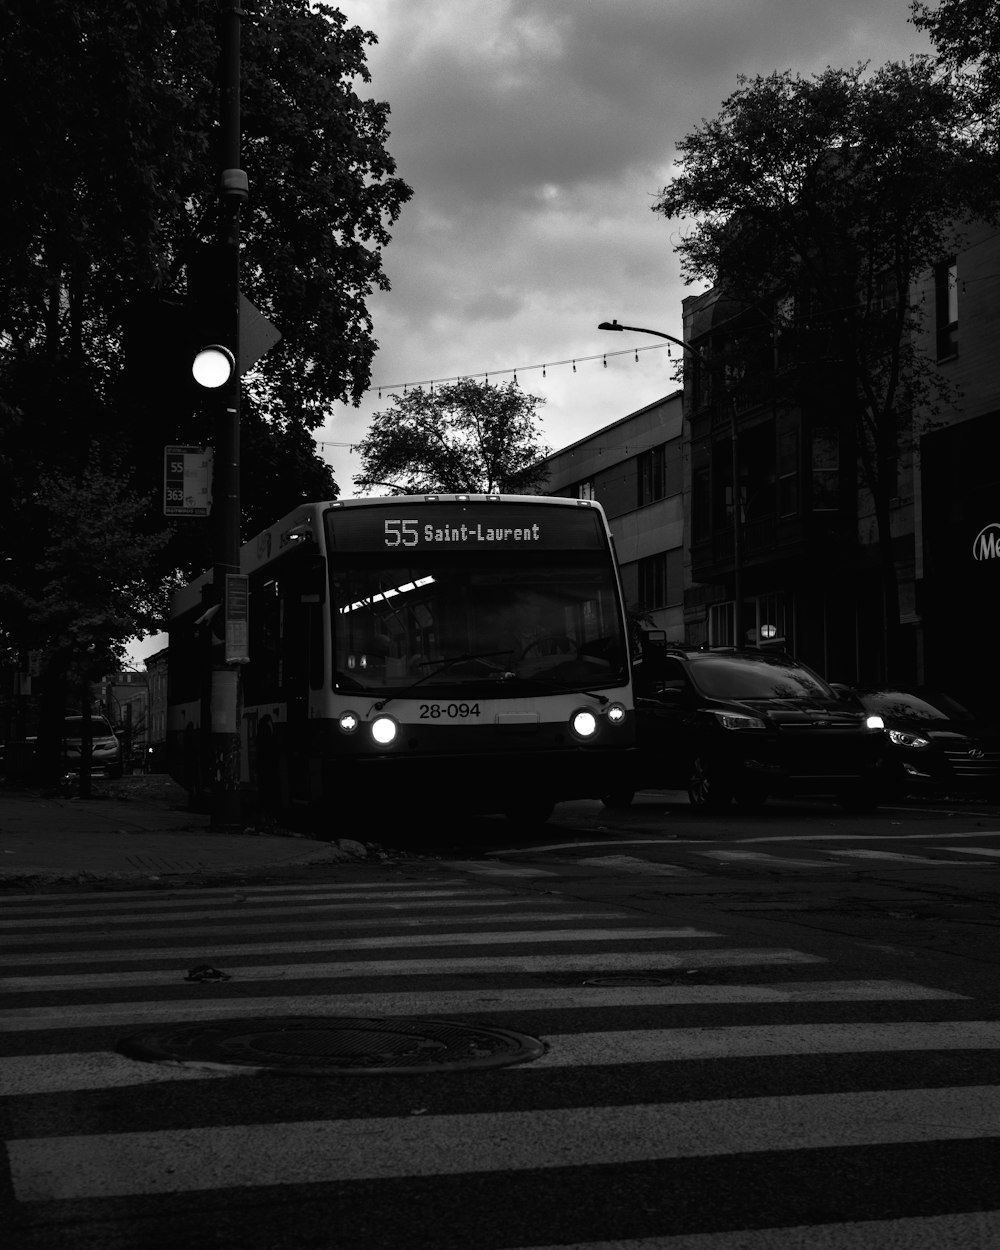 grayscale photo of bus on road